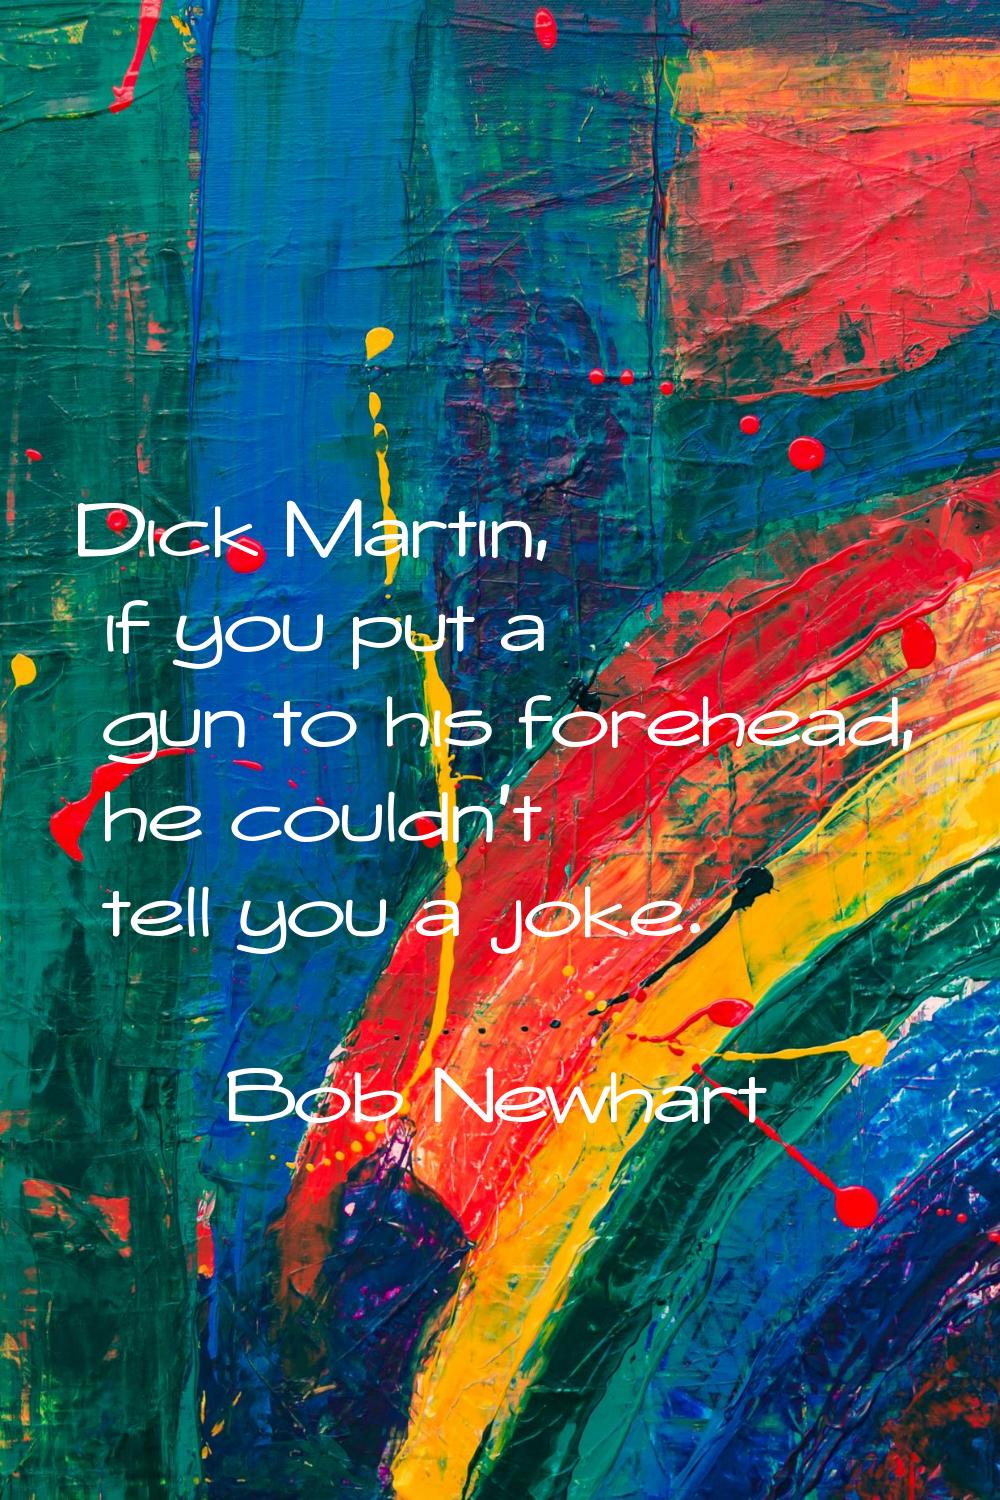 Dick Martin, if you put a gun to his forehead, he couldn't tell you a joke.